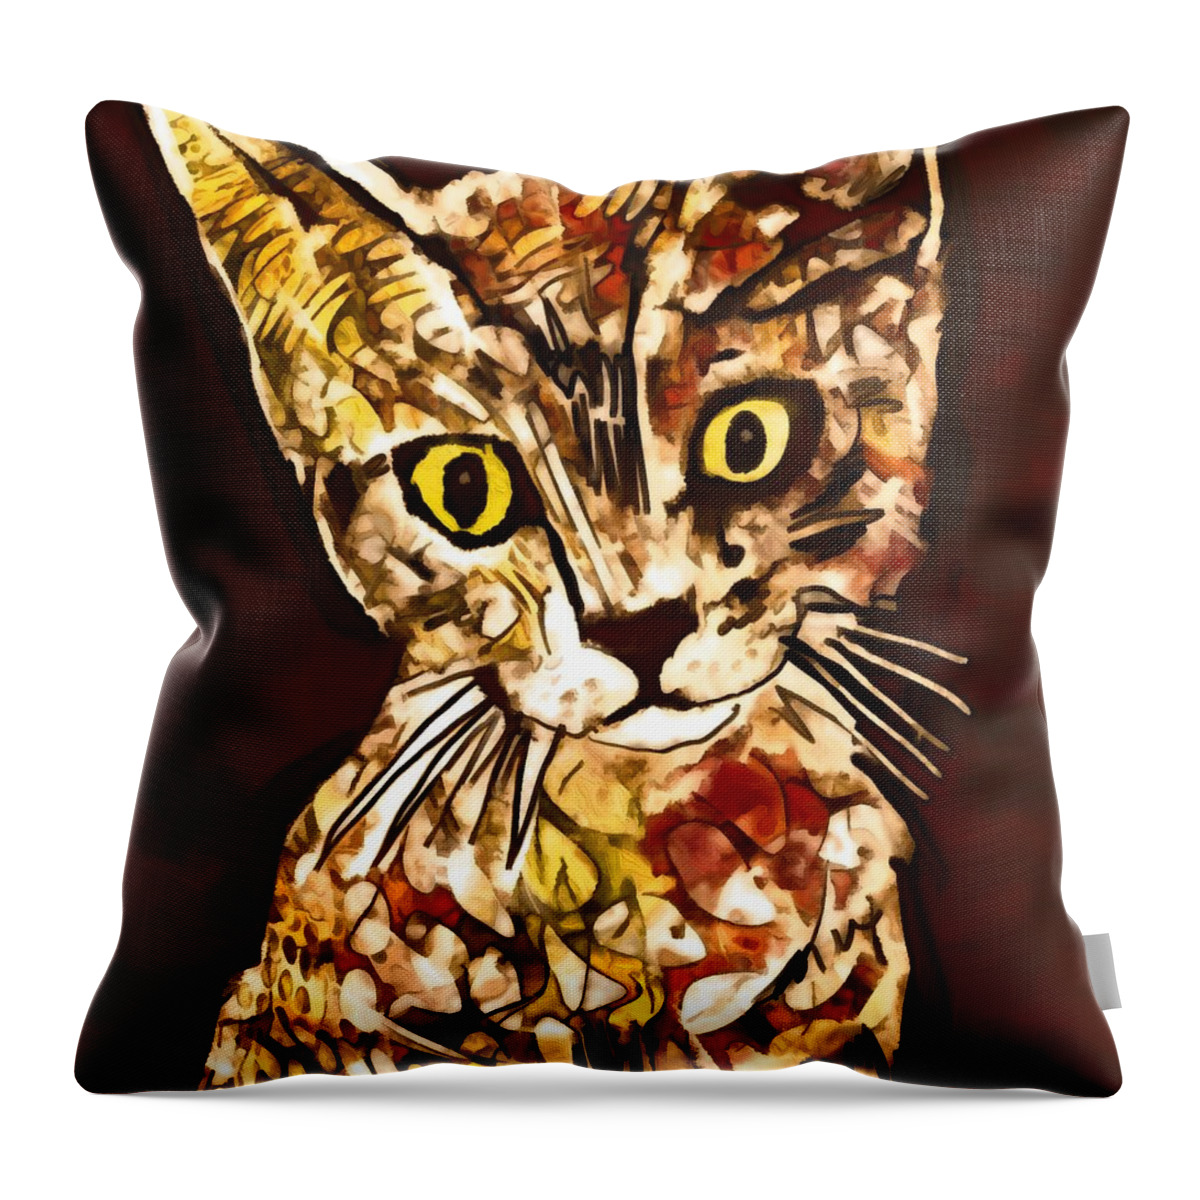  Throw Pillow featuring the mixed media Colorful Kitten 6 by Eileen Backman